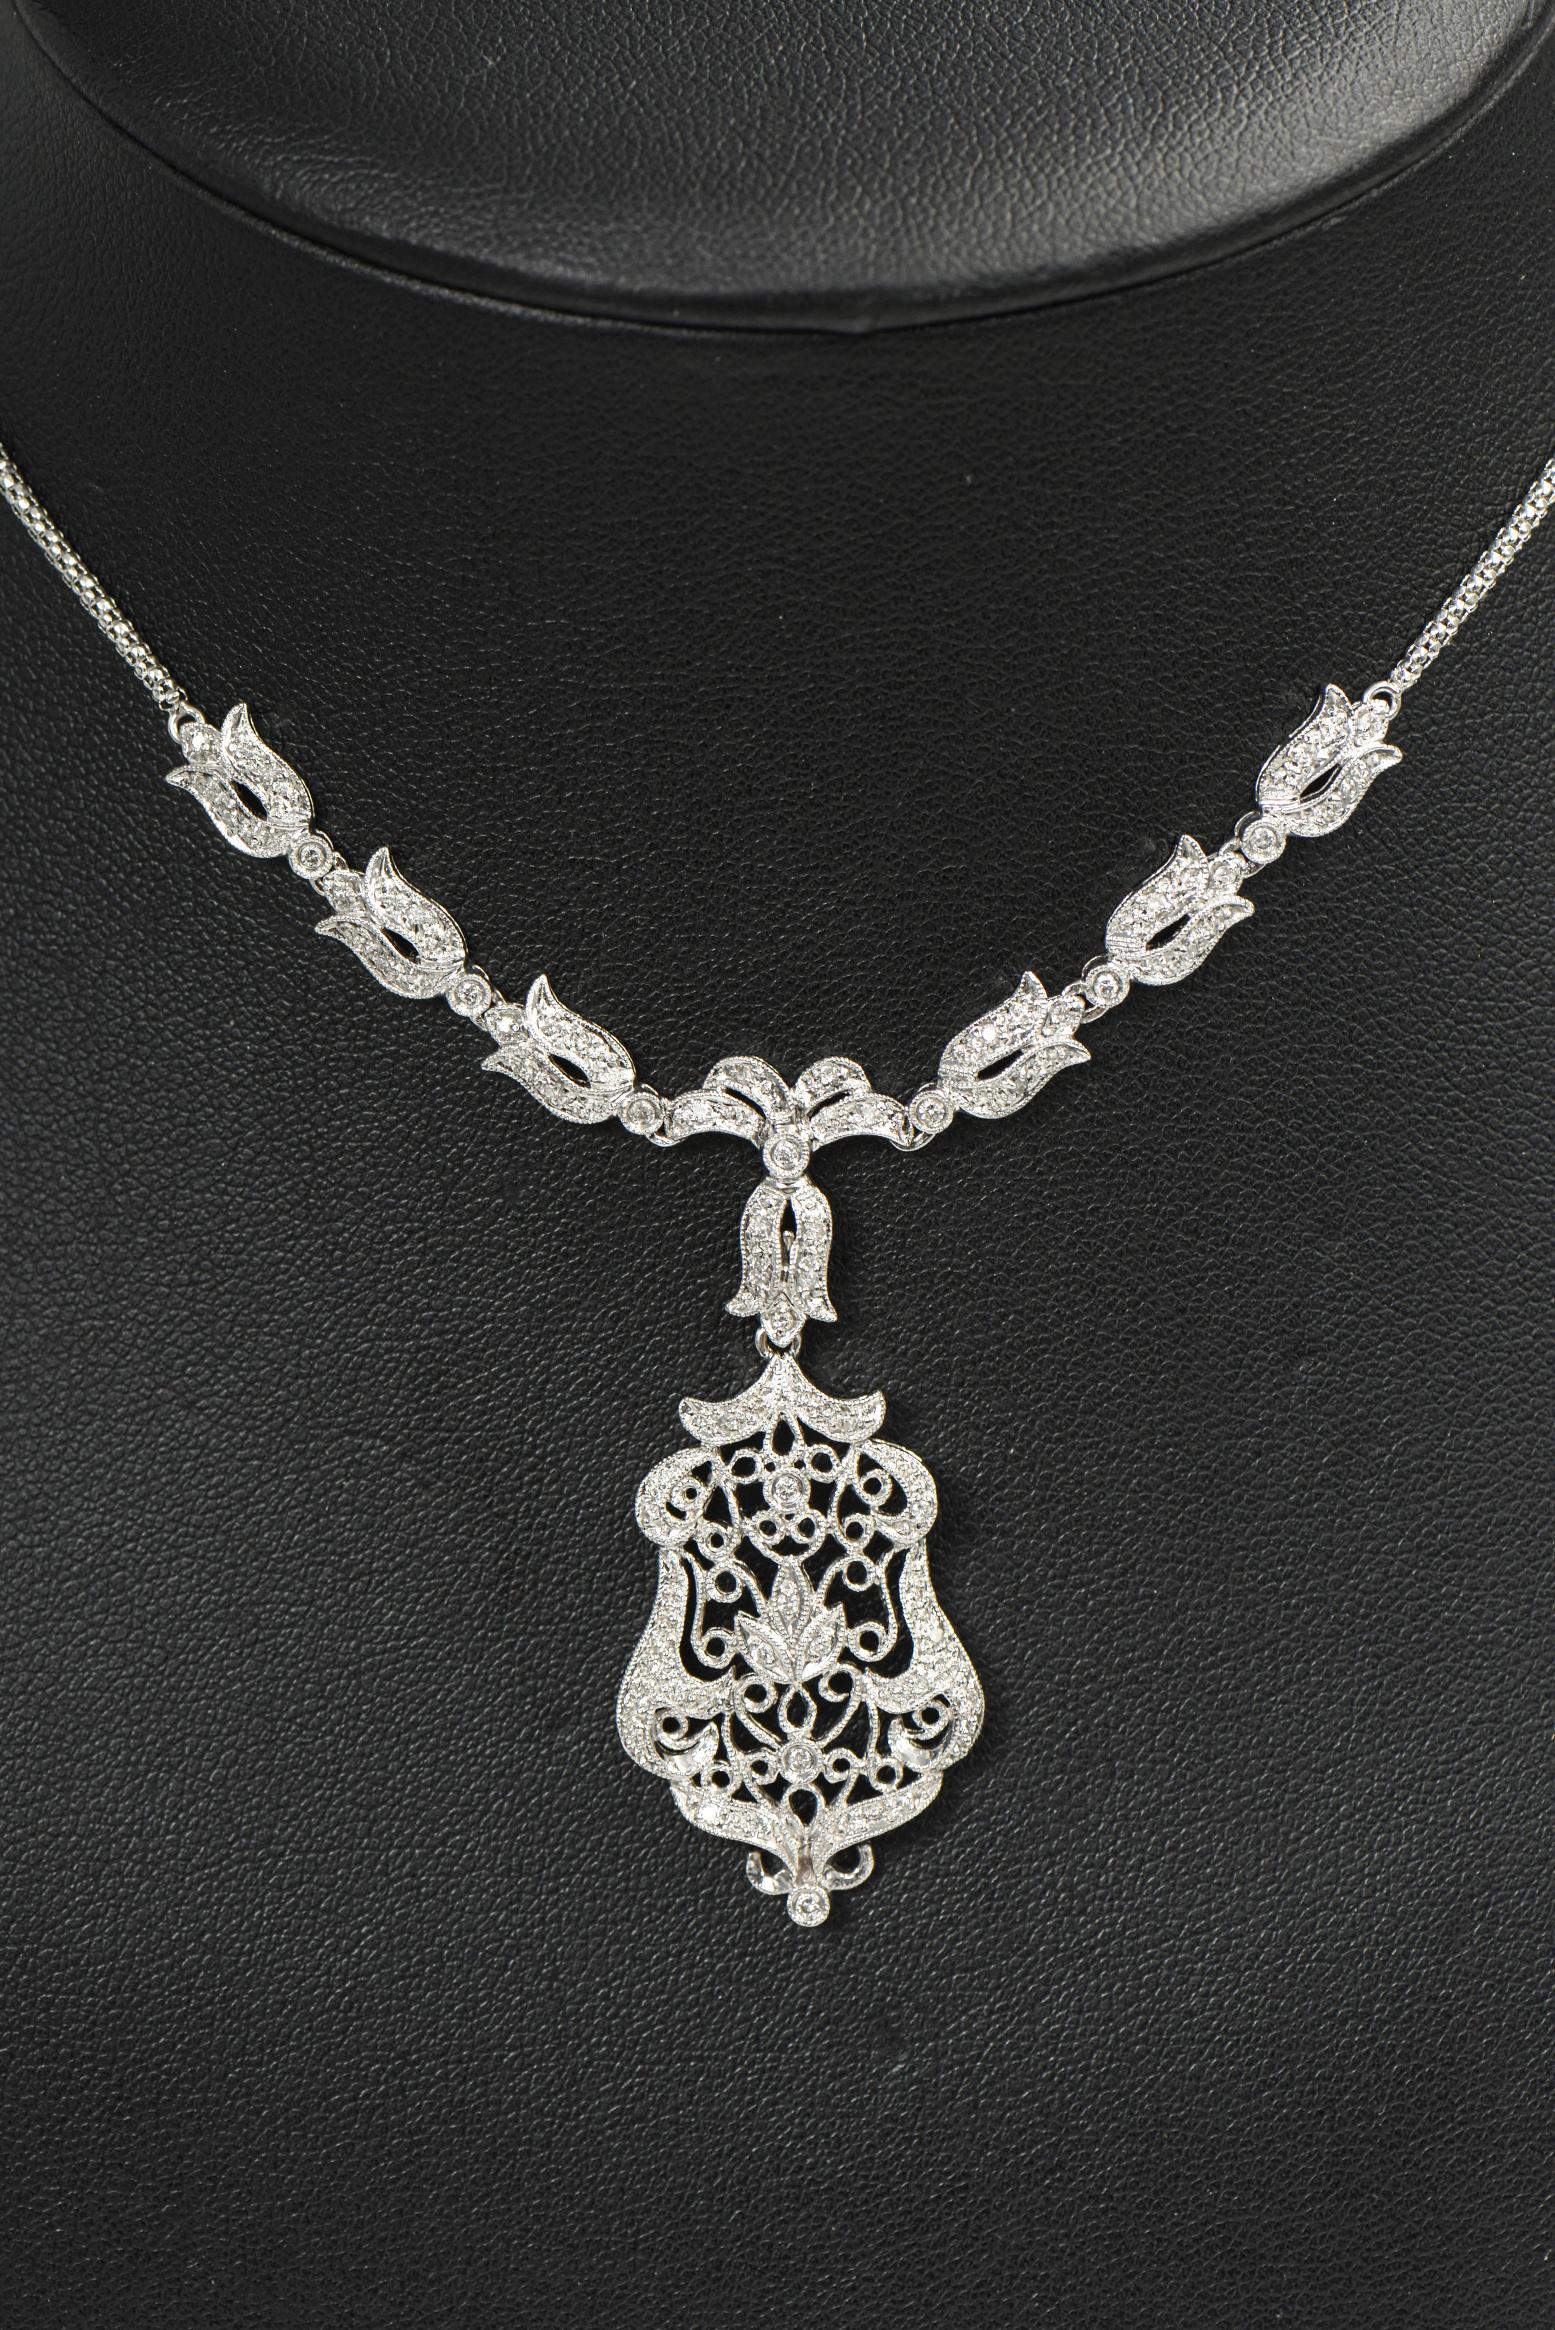 Delicate diamond 14k white gold necklace featuring a floral and scroll filagree design drop pendant necklace.  The back part of the chain is a weave pattern and the front near the pendant has six diamond tulip like flowers with a centralized diamond